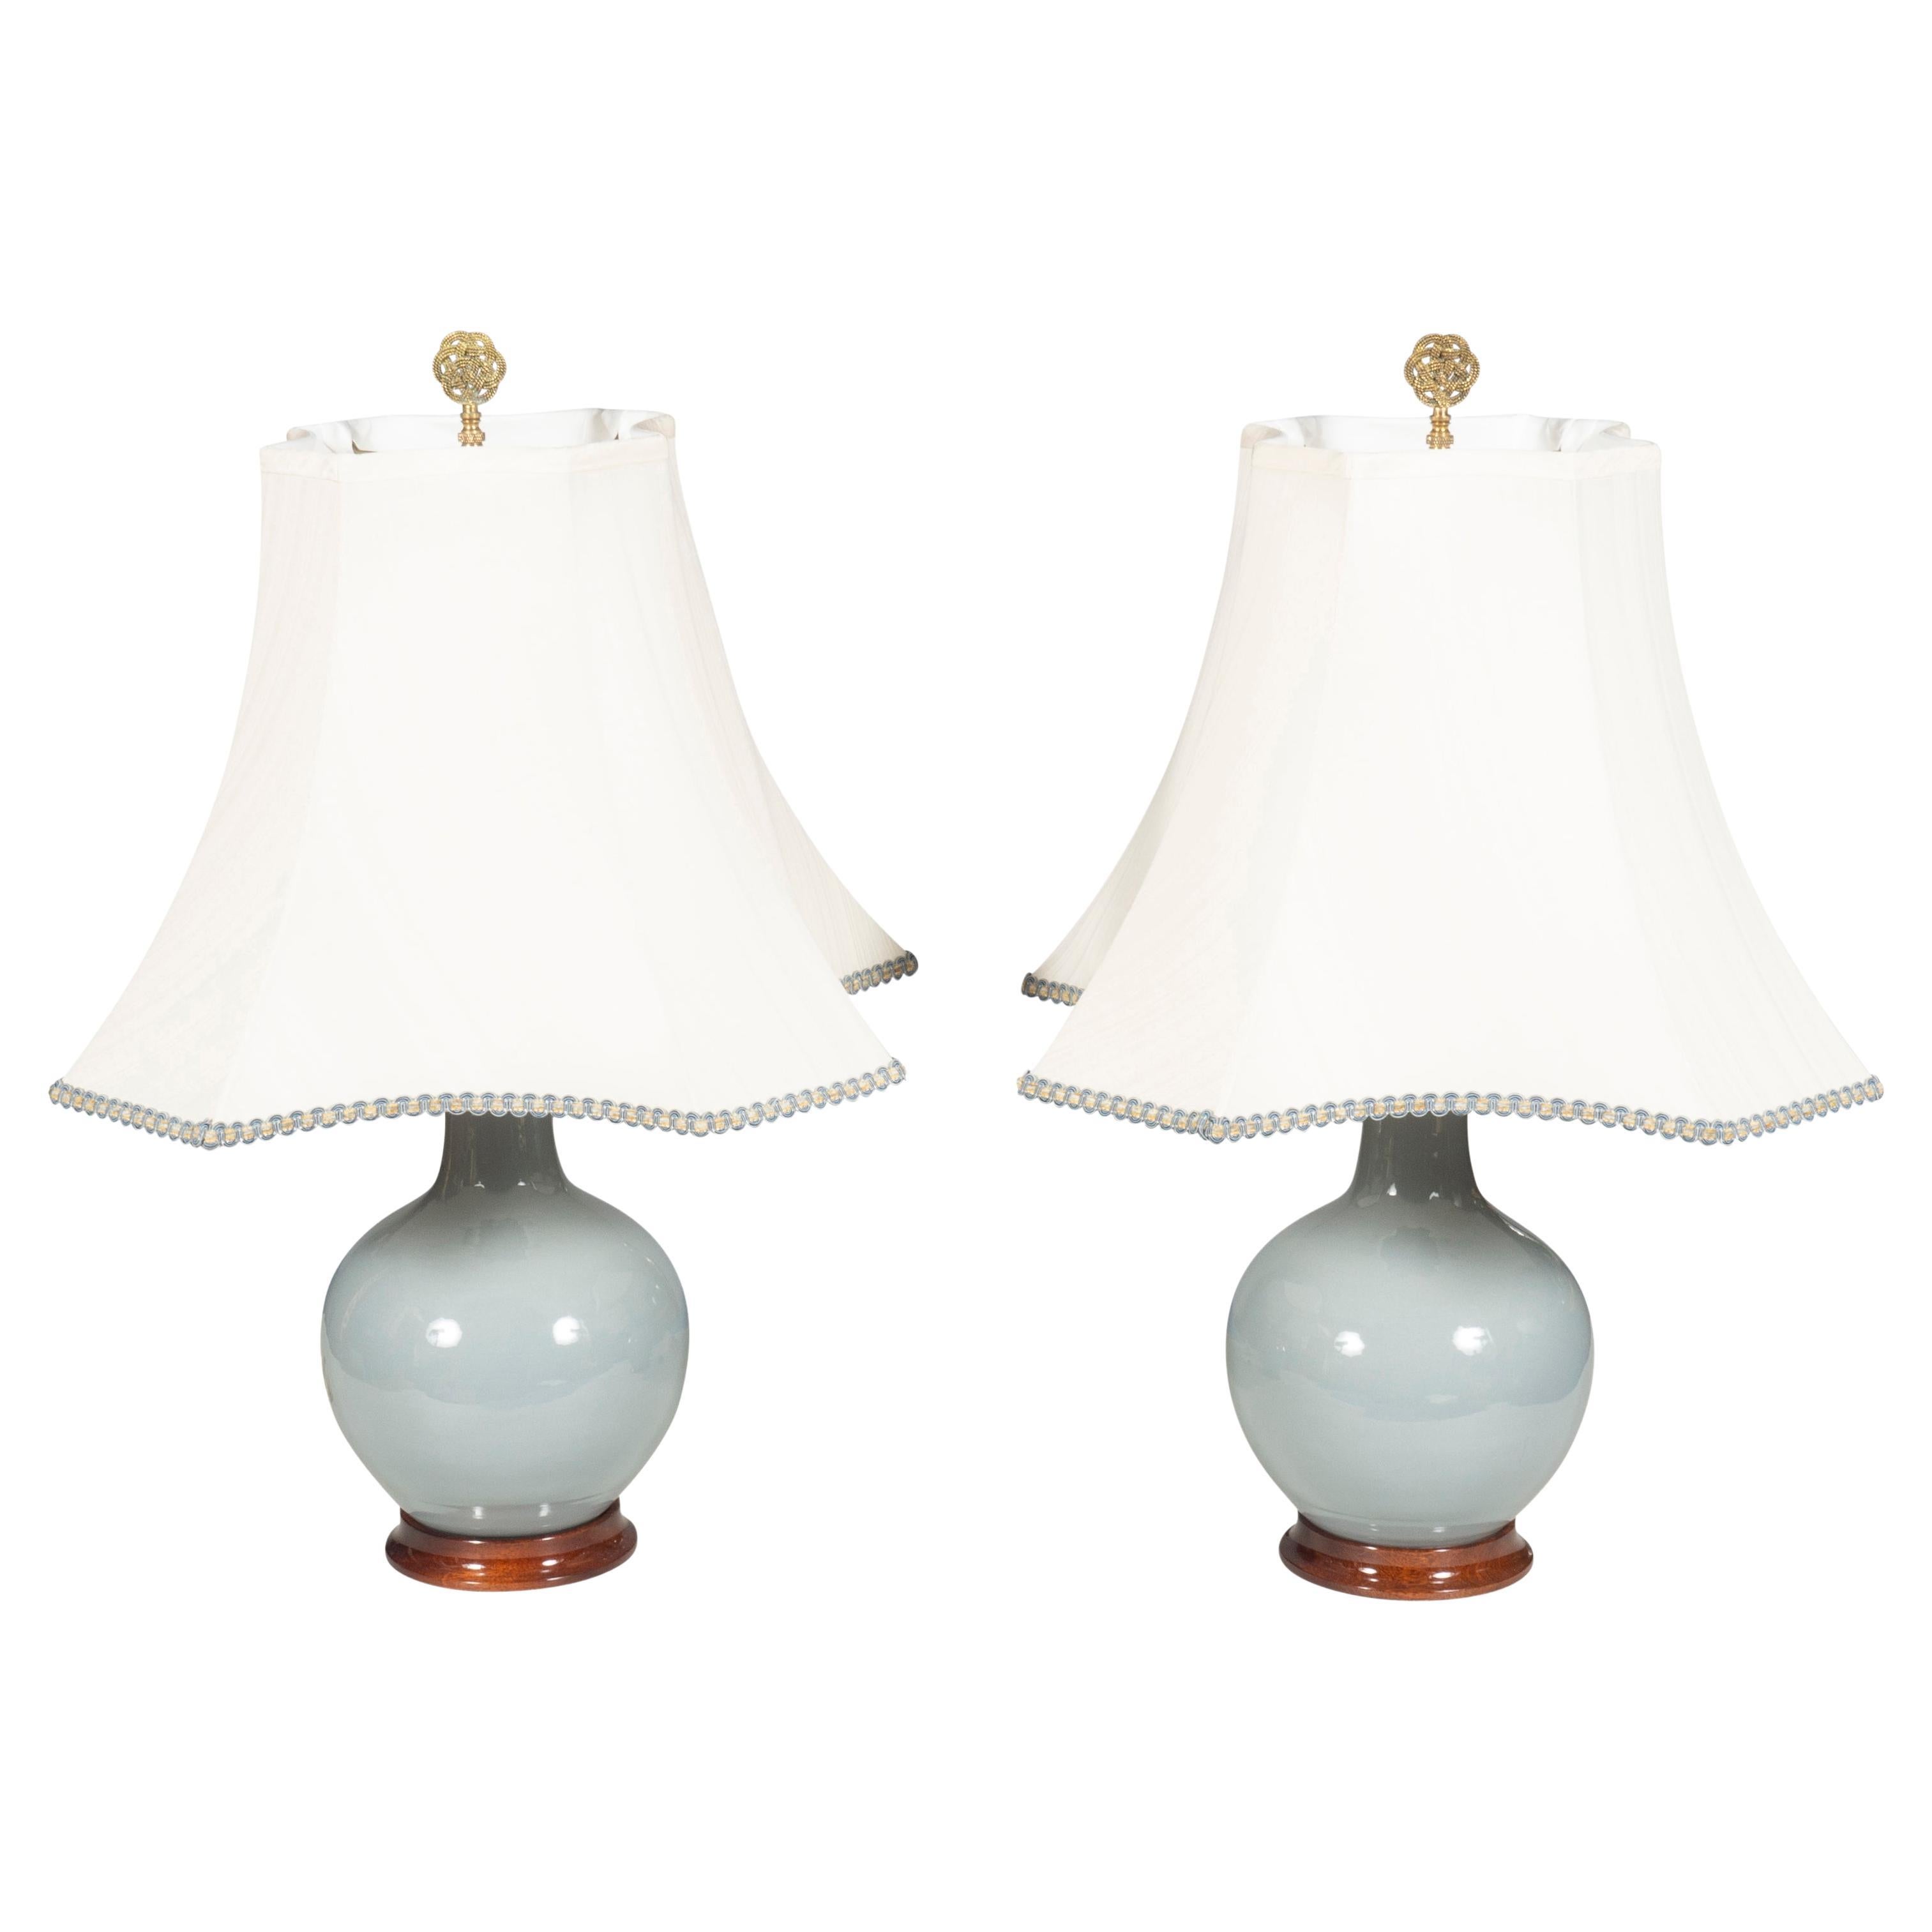 Pair of Christopher Spitzmiller Ceramic Table Lamps For Sale